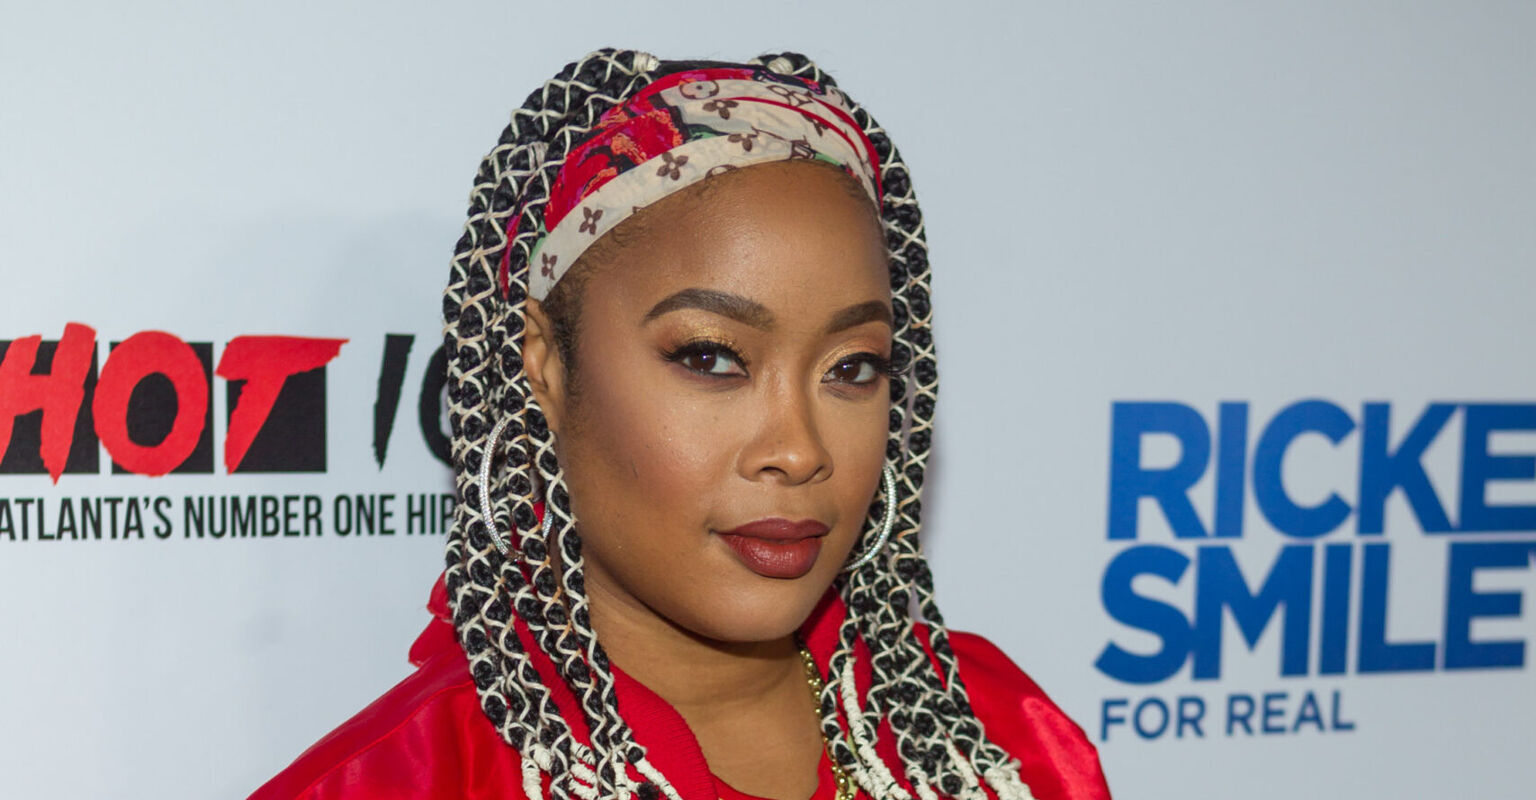 Look: Da Brat expecting first child with fiancee Jesseca Dupart 